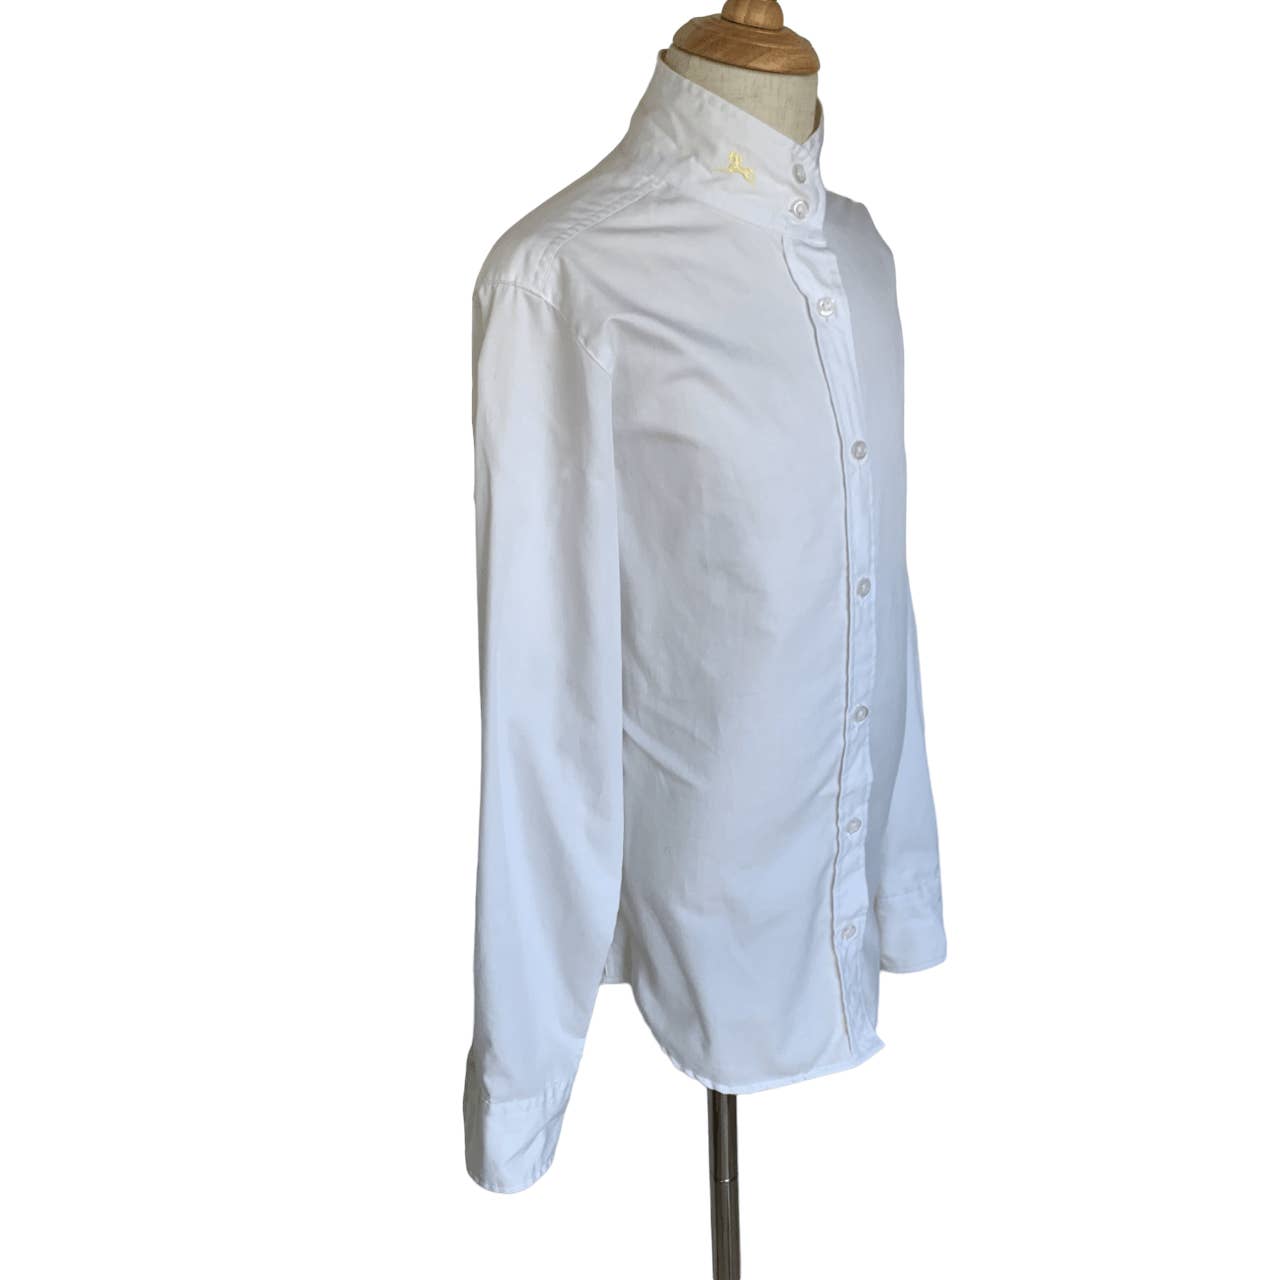 R.J. Classics 'Essential Collection' Show Shirt in White - Youth 14